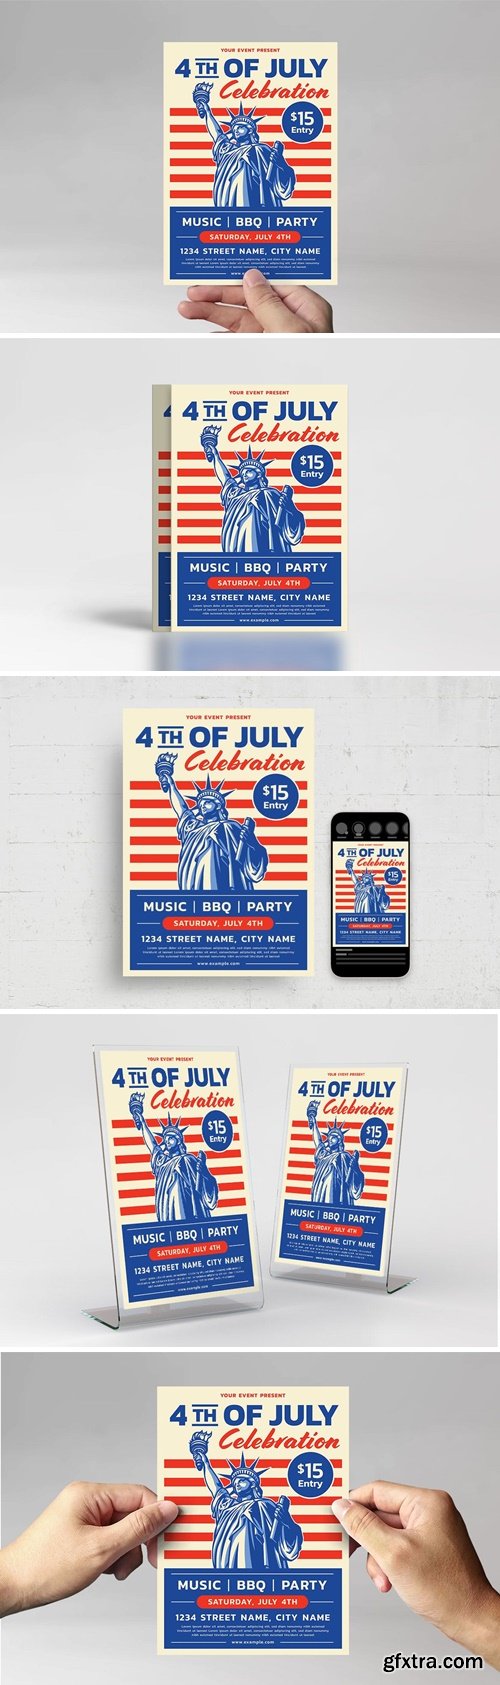 4th of July Flyer Template E2KZRC6